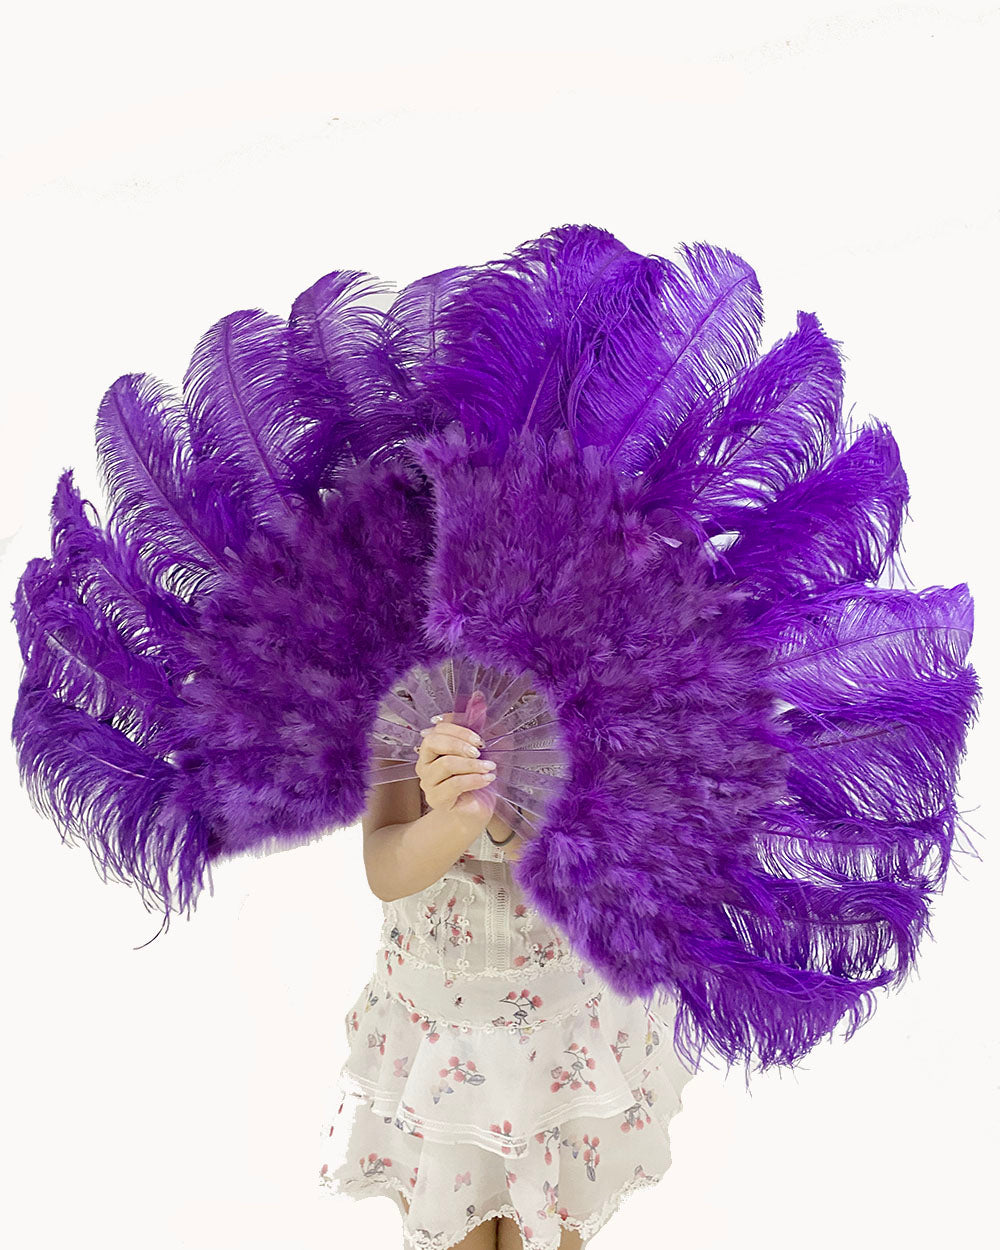 hotfans Drak Purple Marabou Ostrich Feather Fan 24x 43 with Travel Leather Bag for A Pair